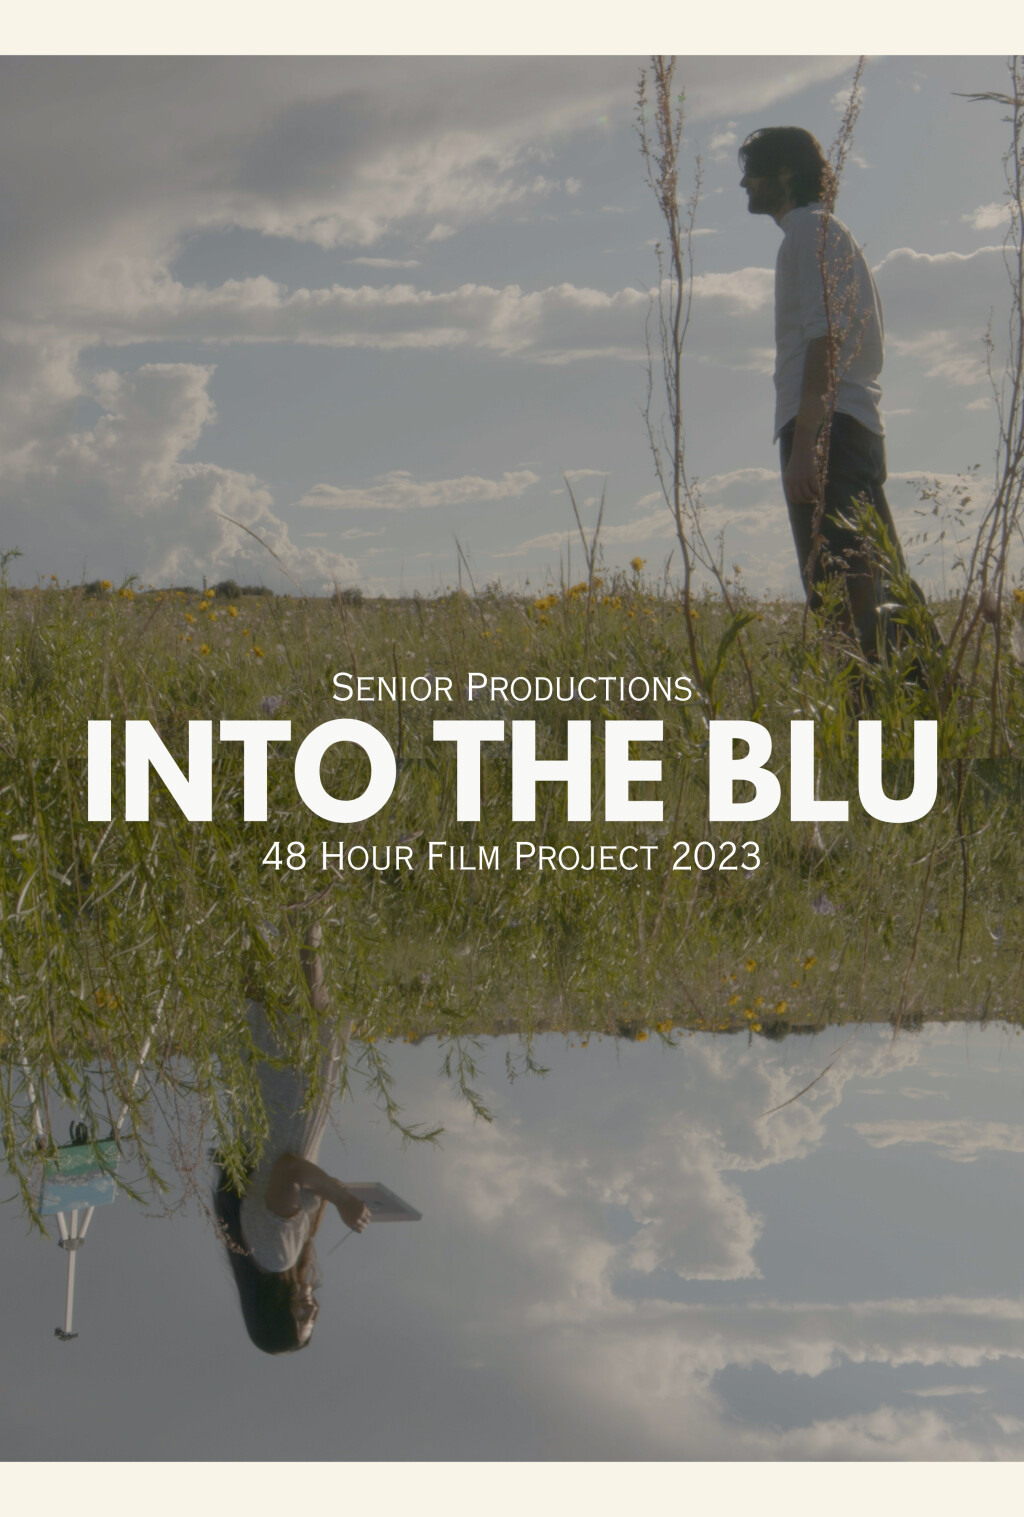 Filmposter for Into the BLU